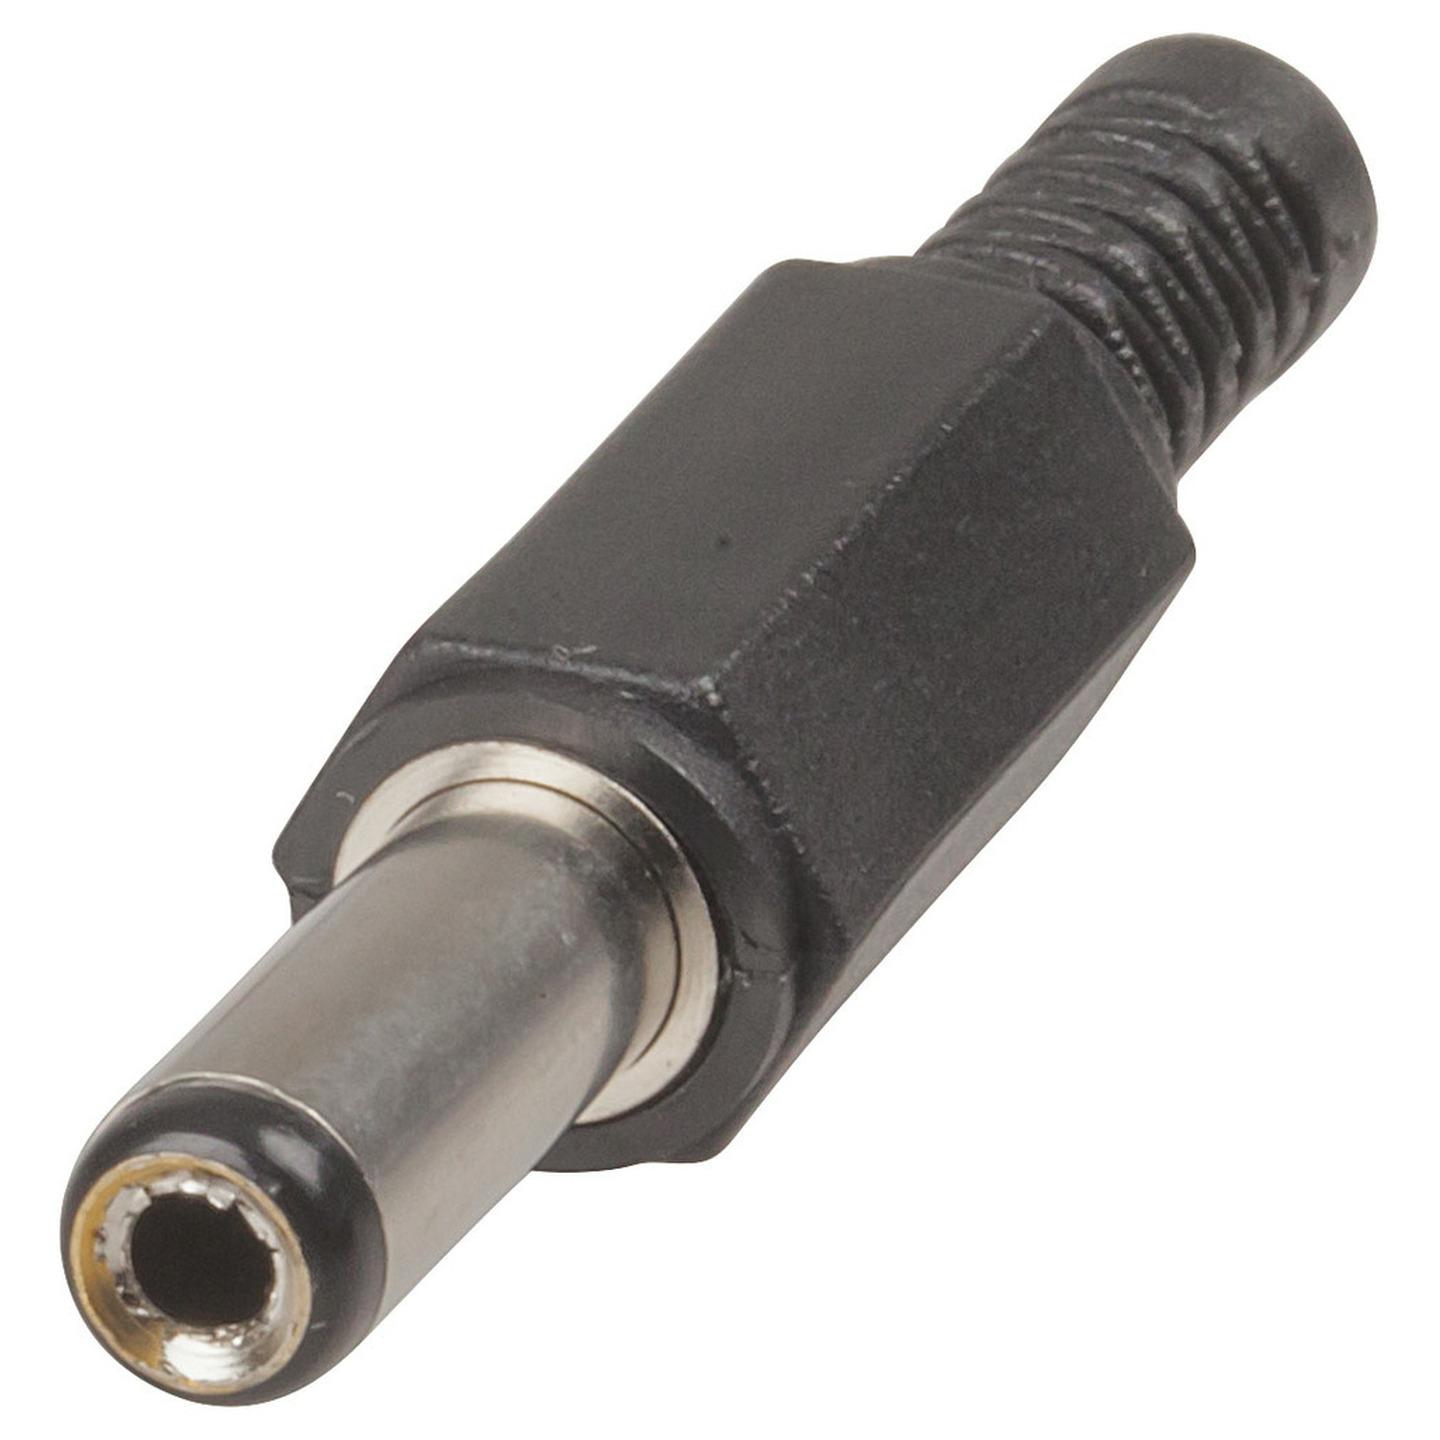 2.5mm DC Power Line Connector 14mm shaft